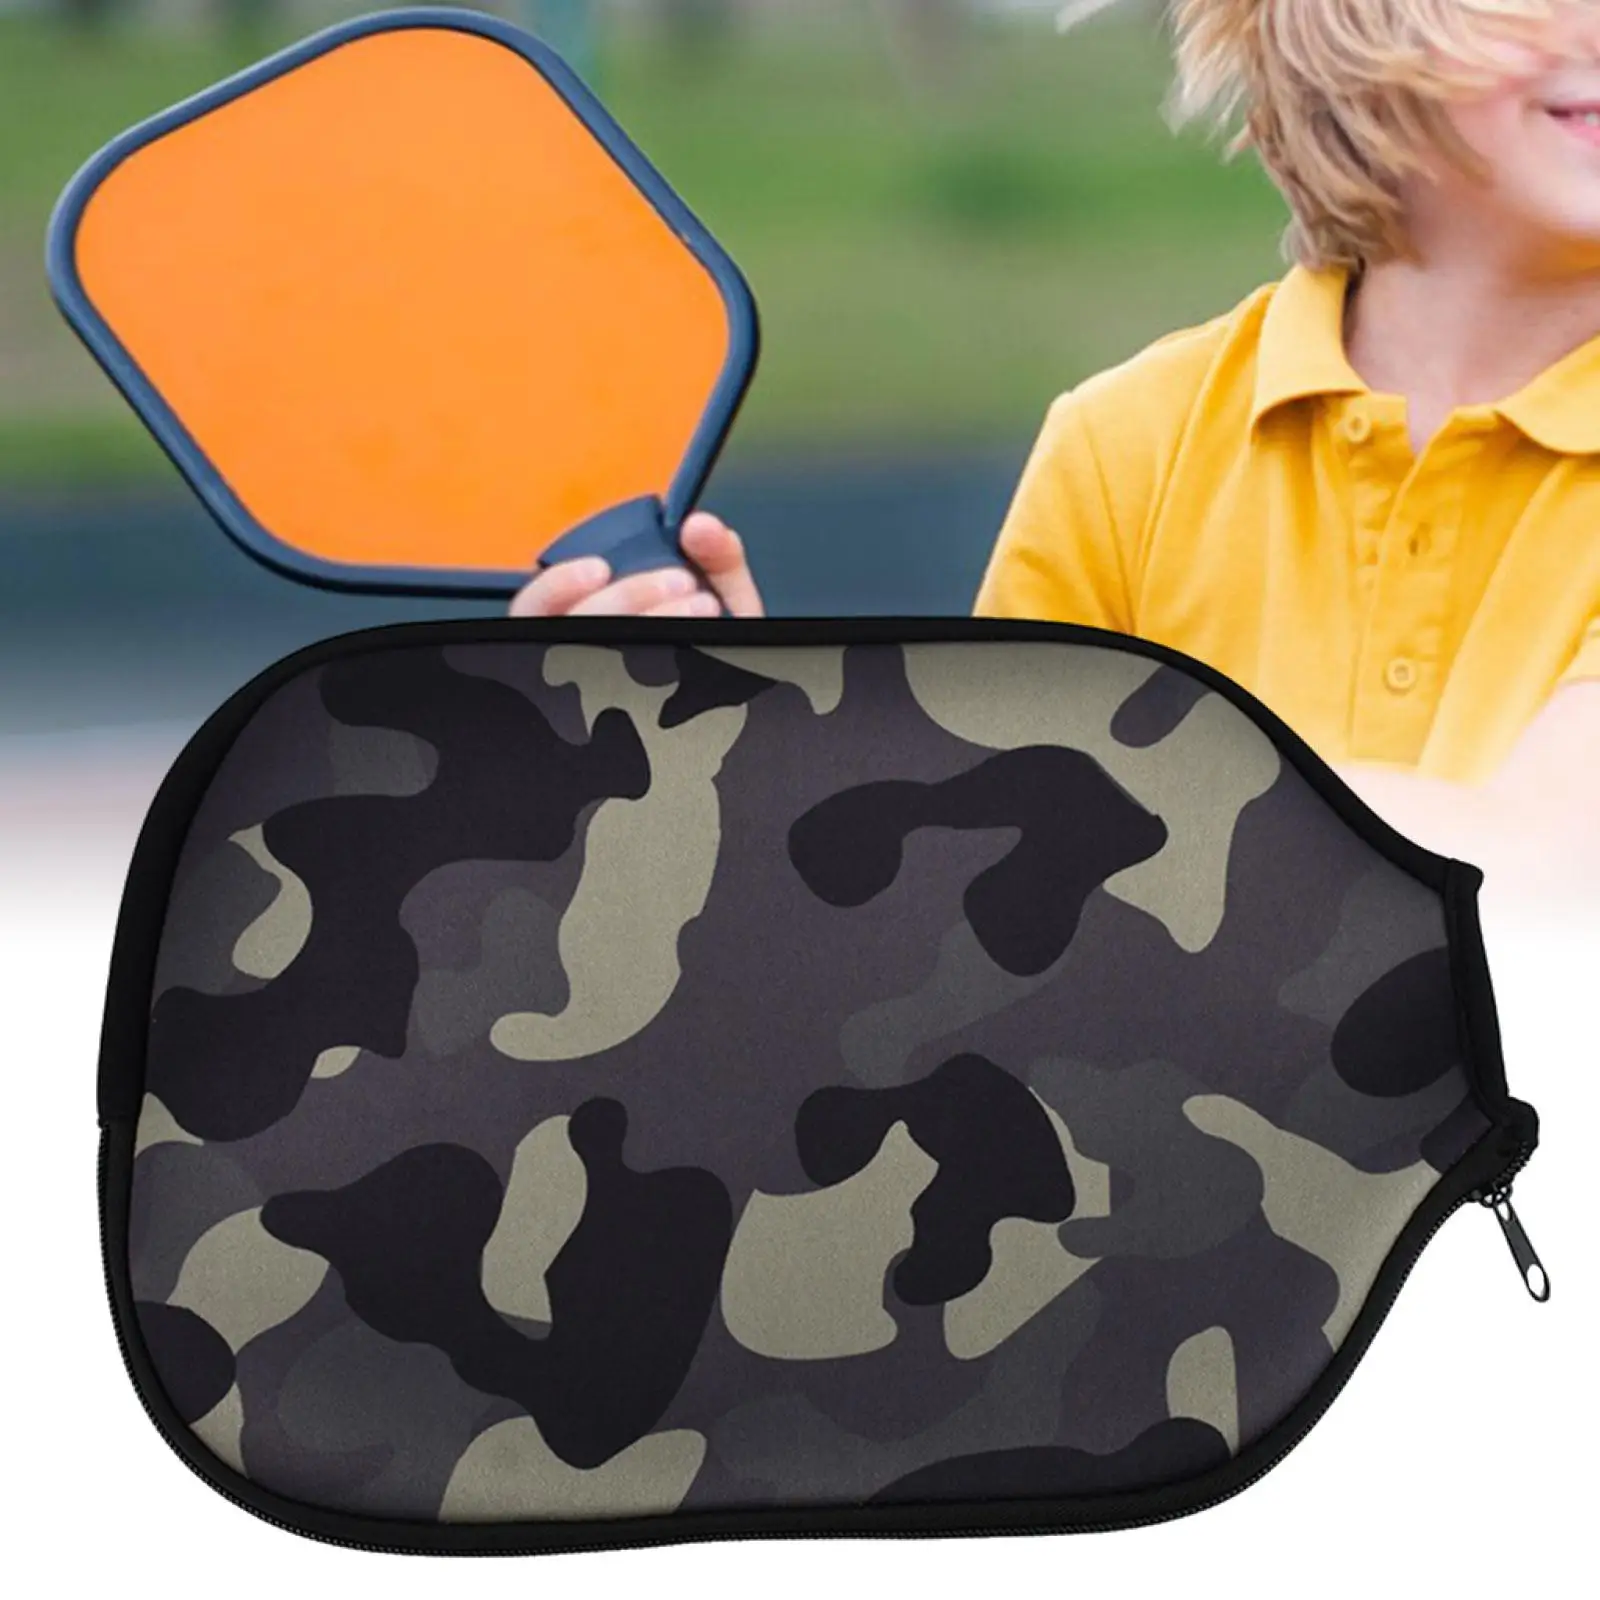 Neoprene Pickleball Racket Cover Pouch Fits Most Paddle, Racket Zipper Racket Cover Case for Training Sports Practice Outdoor